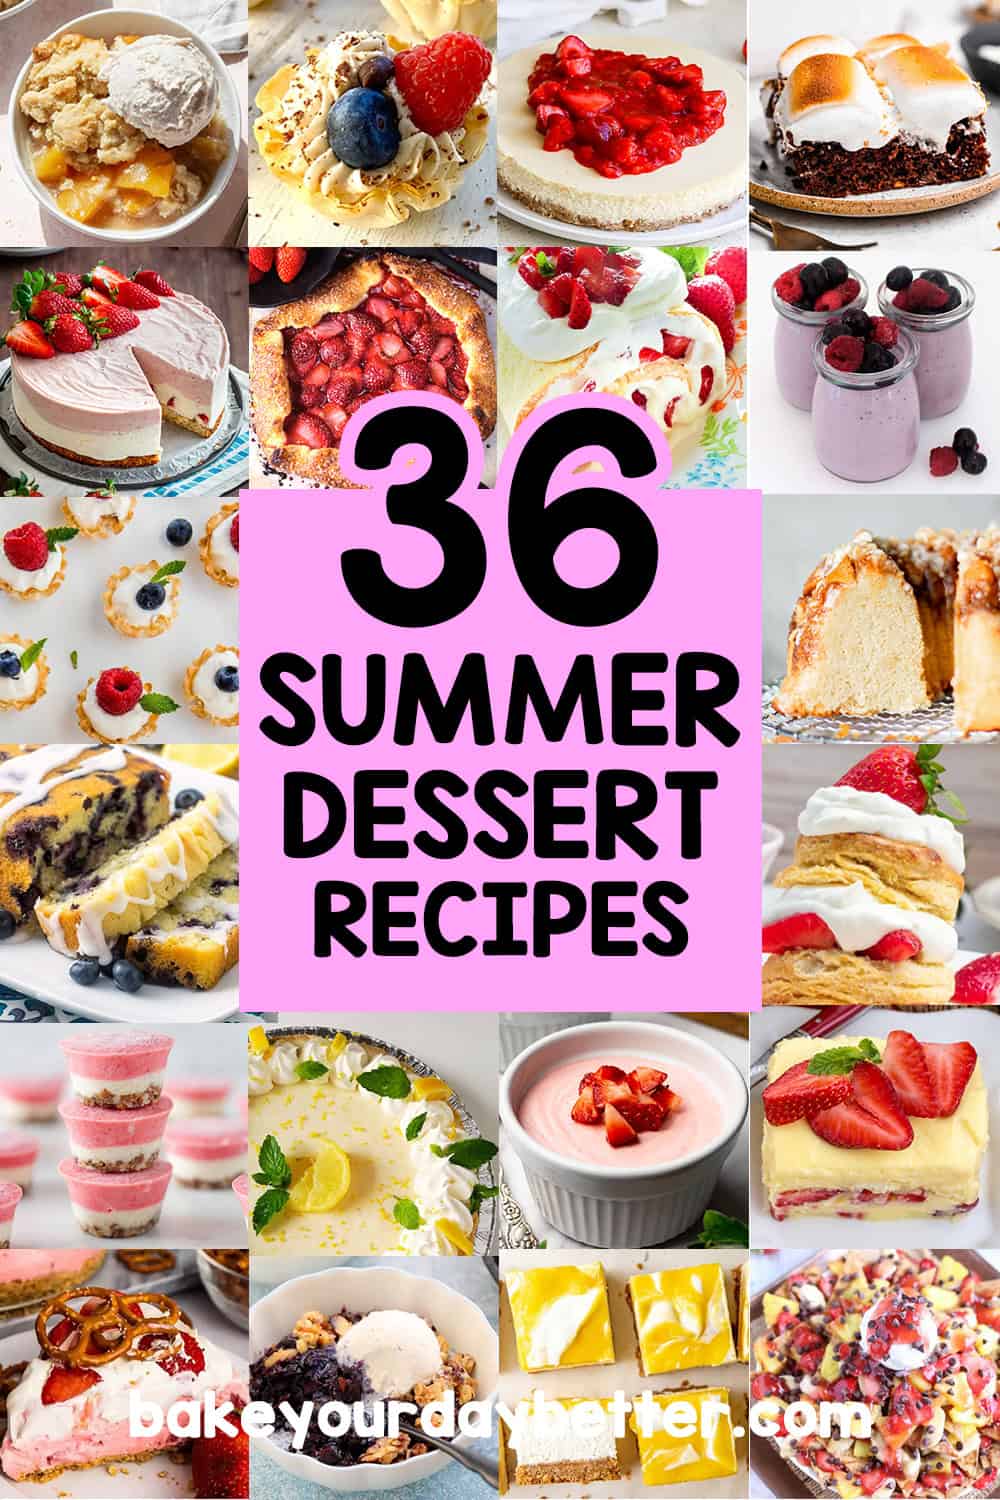 pictures of various summer desserts with text overlay that says: 36 summer dessert recipes